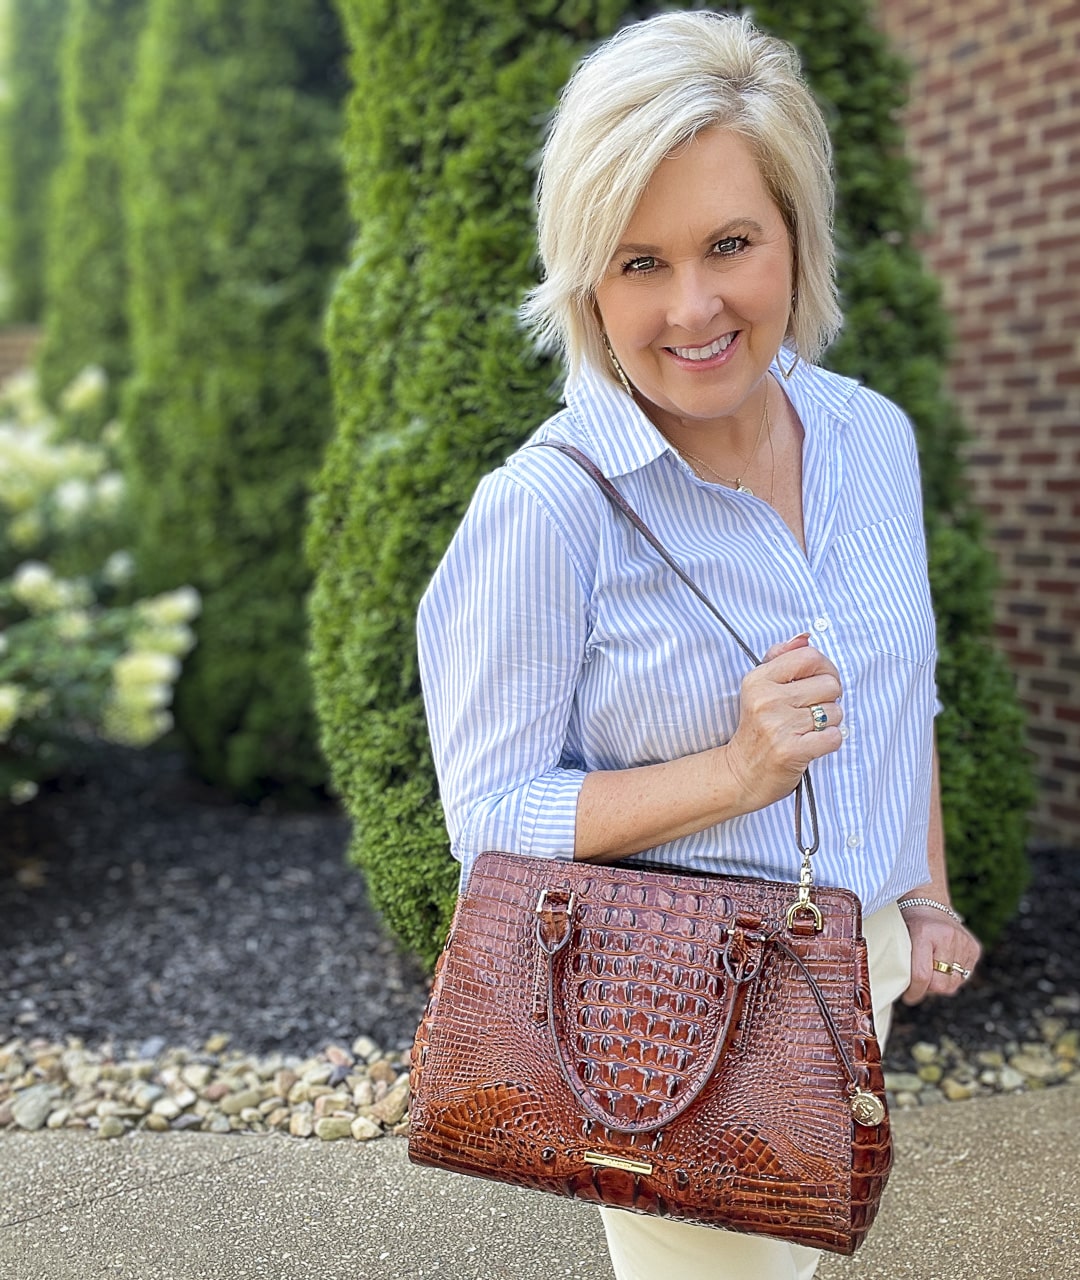 Over 40 Fashion Blogger, Tania Stephens is showing how to style Chinos and a striped shirt for summer14